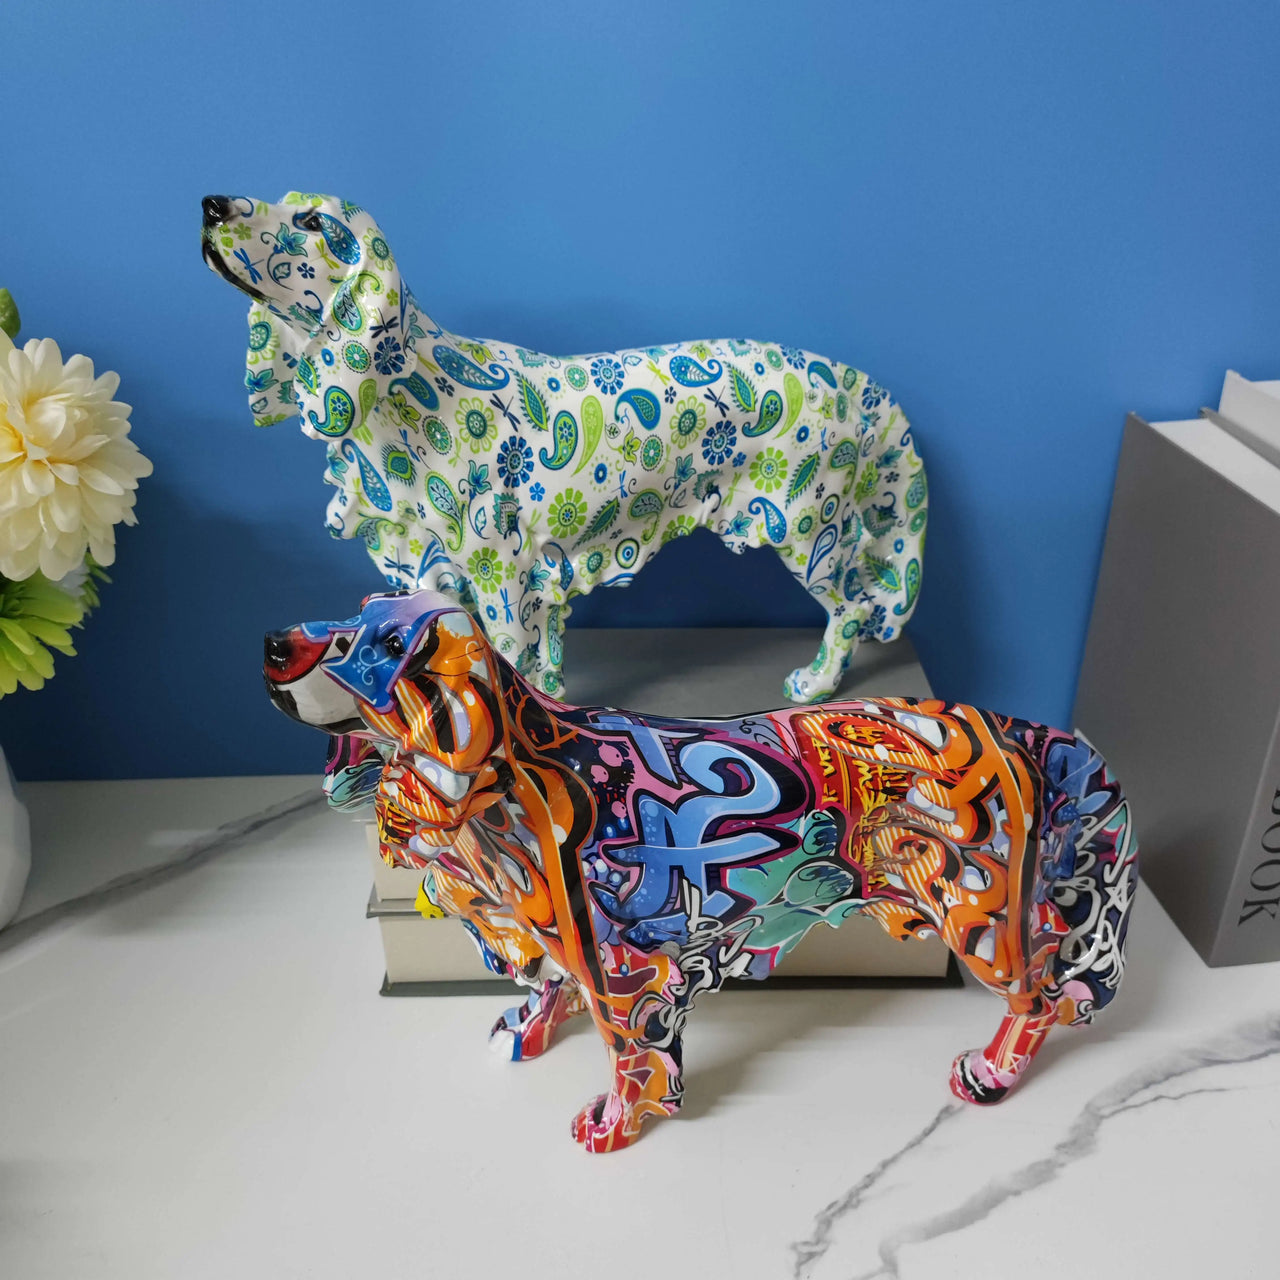 Modern Graffiti Painted Dachshund Dog Office Decoration Craft Sculptures and Statues